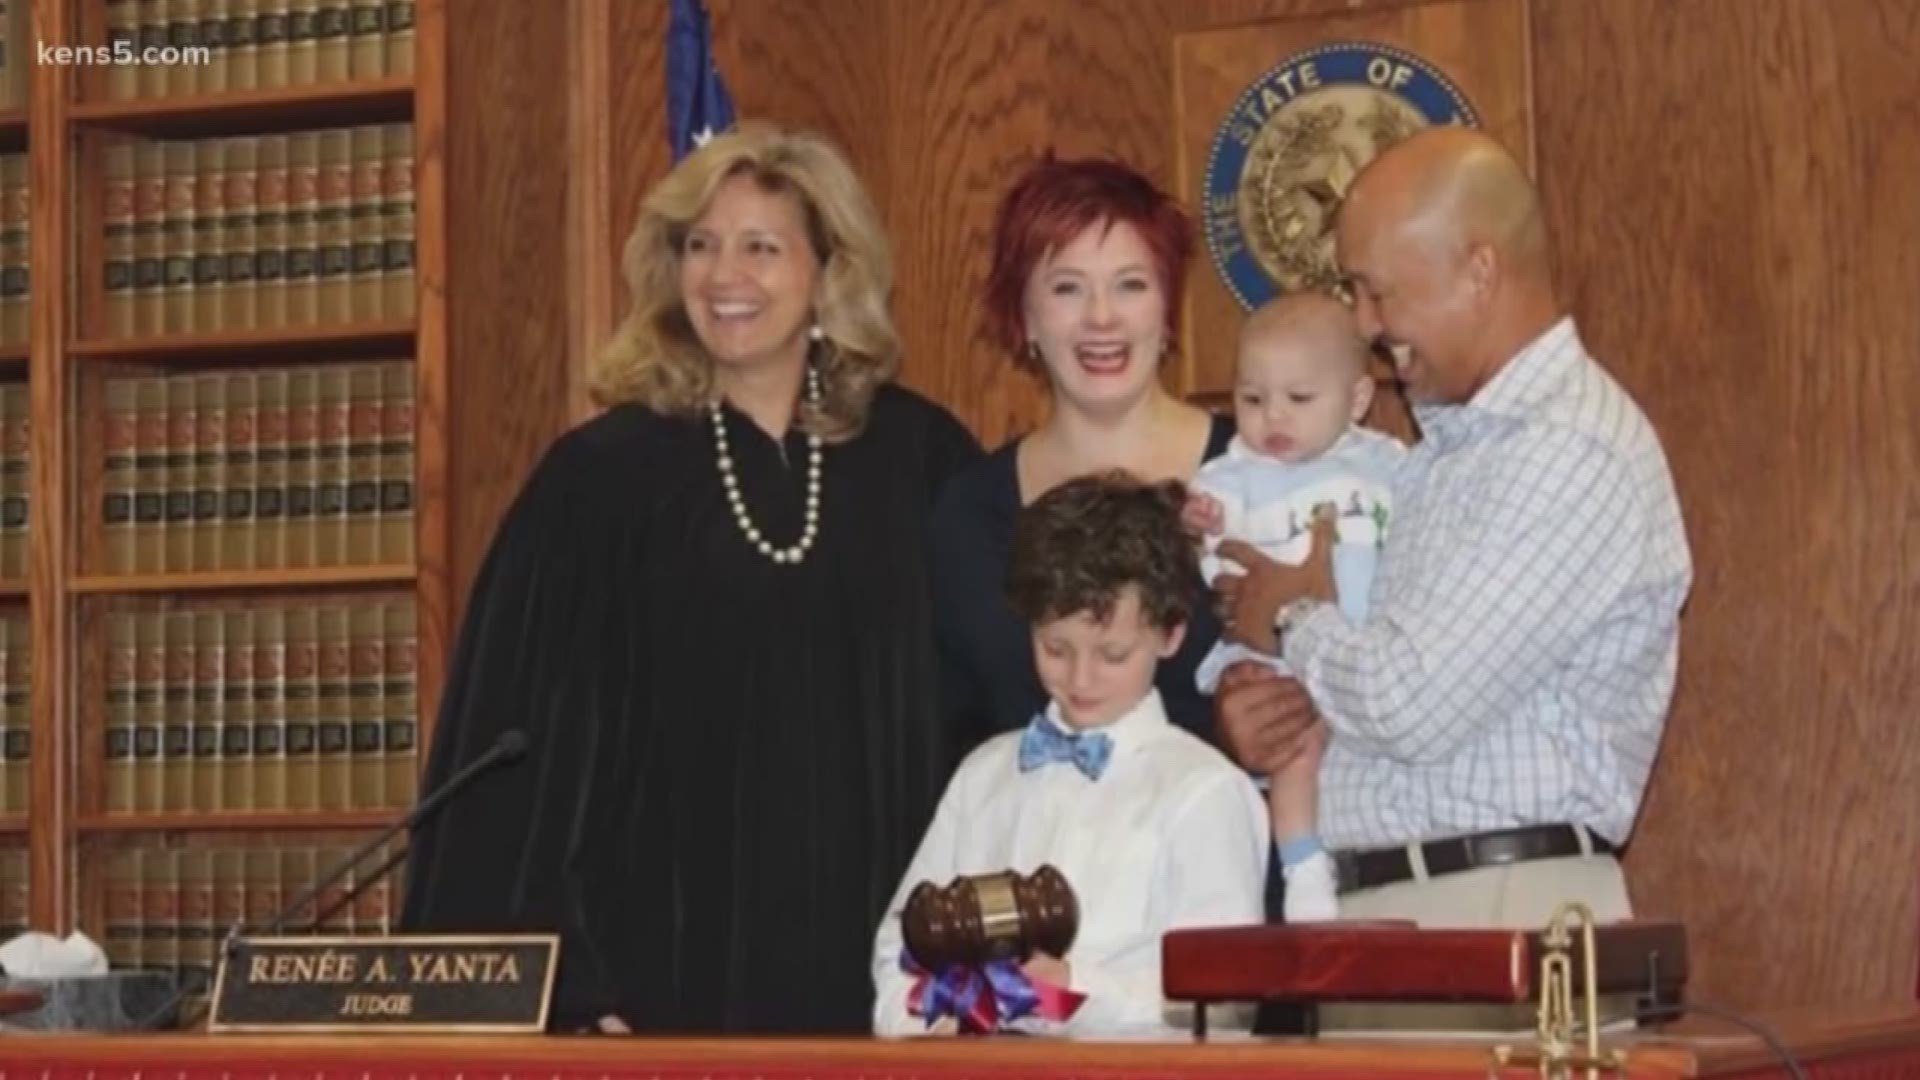 Bexar County District Court Judge Renee Yanta says that she enjoys being a part of special days when foster kids join their forever family.